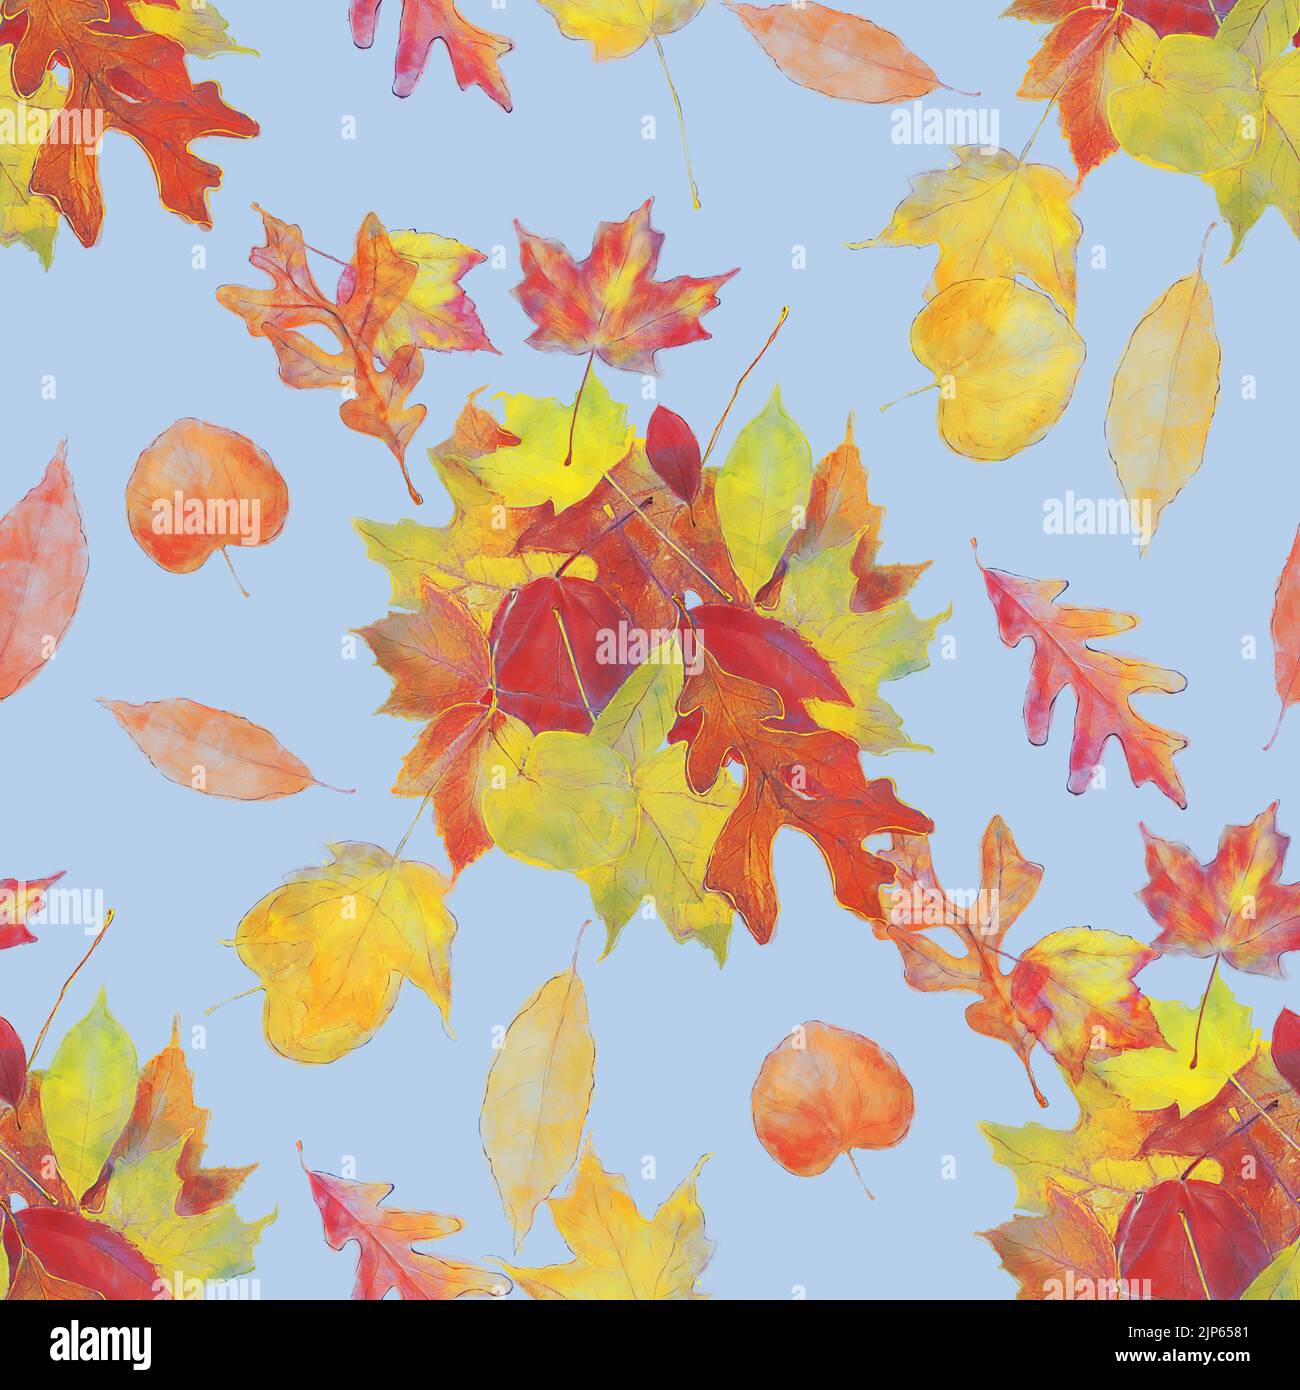 Watercolor Image of Colorful Autumn Leaves . Seamless Pattern Stock Photo